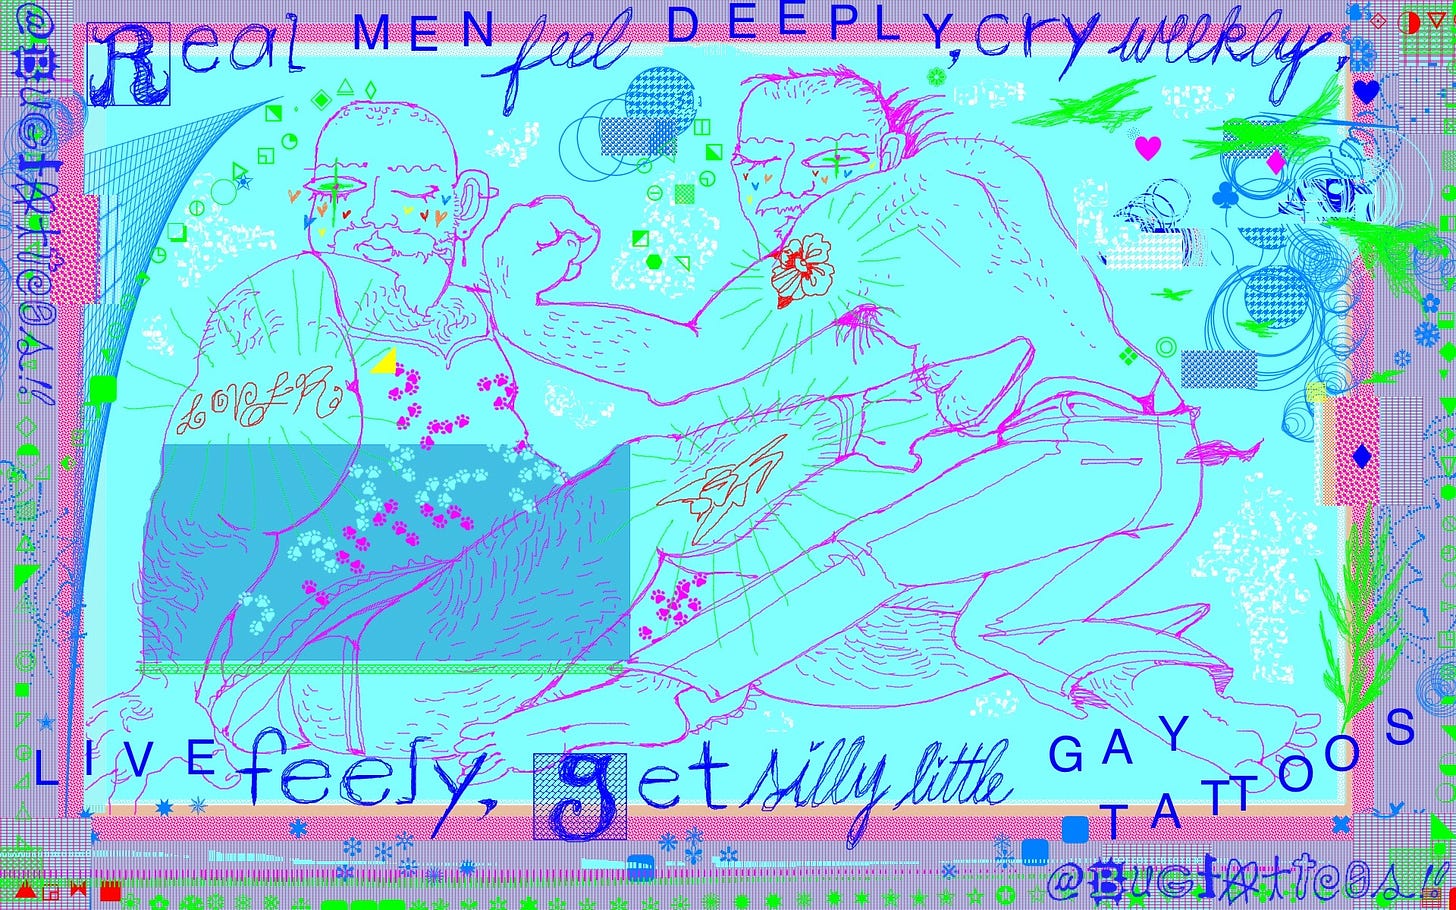 a tattoo advertisement made in kidpix using obnoxious cyan and magenta with neon and red accents it says REAL MEN FEEL DEEPLY CRY WEEKLY LIVE FREELY GET SILLY LITTLE GAY TATTOOS in blue semi scribbled letters it features two figures posing with tattoos drawn sketchily one is fat and hairy and bald wearing a dress with paw prints all over it and vintage little dandy boots hes winking and pointing one toe in the air the other figure is flexing and has a skullet and chinos on with a pink scarf in his right pocket hes winking and barefoot they both have colourful hearts on their cheeks